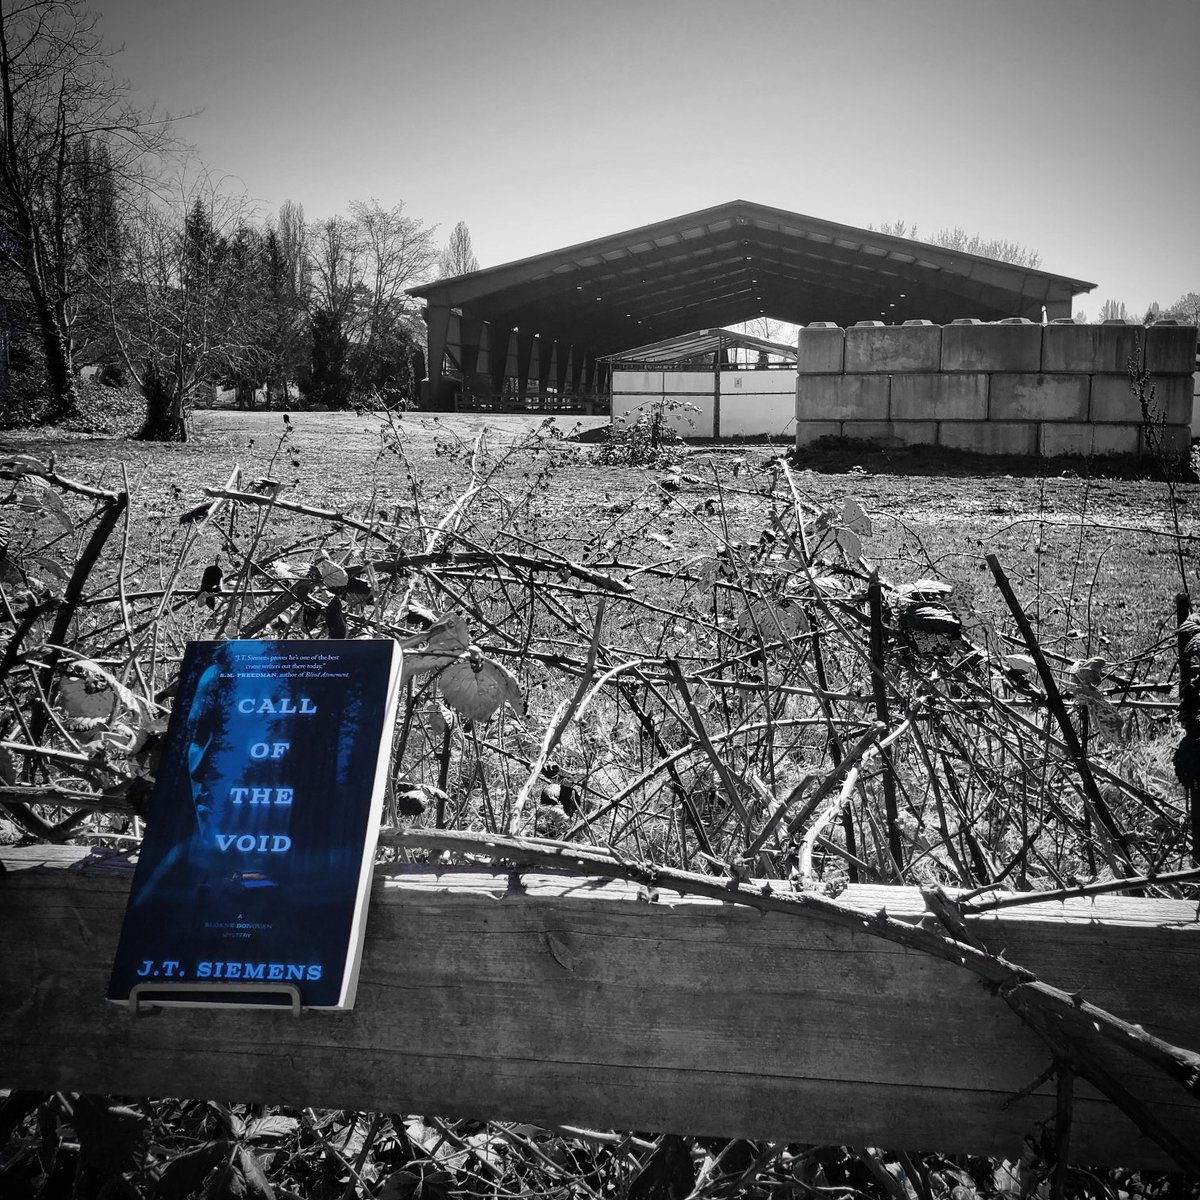 #3 in the CALL OF THE VOID locations tour. Southlands area of Vancouver, where Emily Pike disappeared. ⁦@NeWestPress⁩ #CalloftheVoid #SloaneDonovan #sequel #CrimeFiction amazon.ca/Call-Void-J-T-…